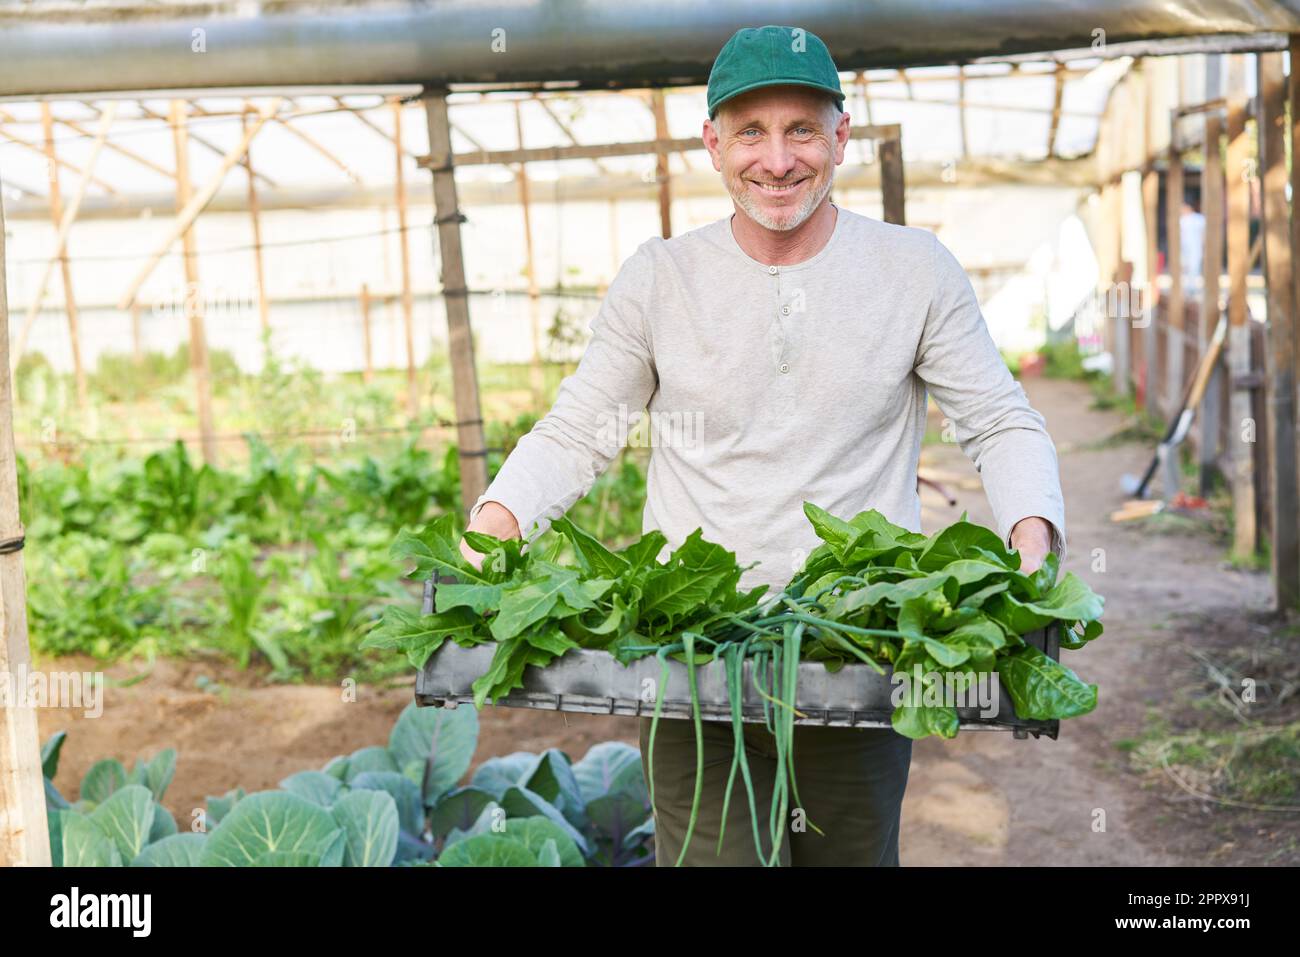 Portrait of smiling male farmer holding crate of leafy vegetables while standing in greenhouse Stock Photo